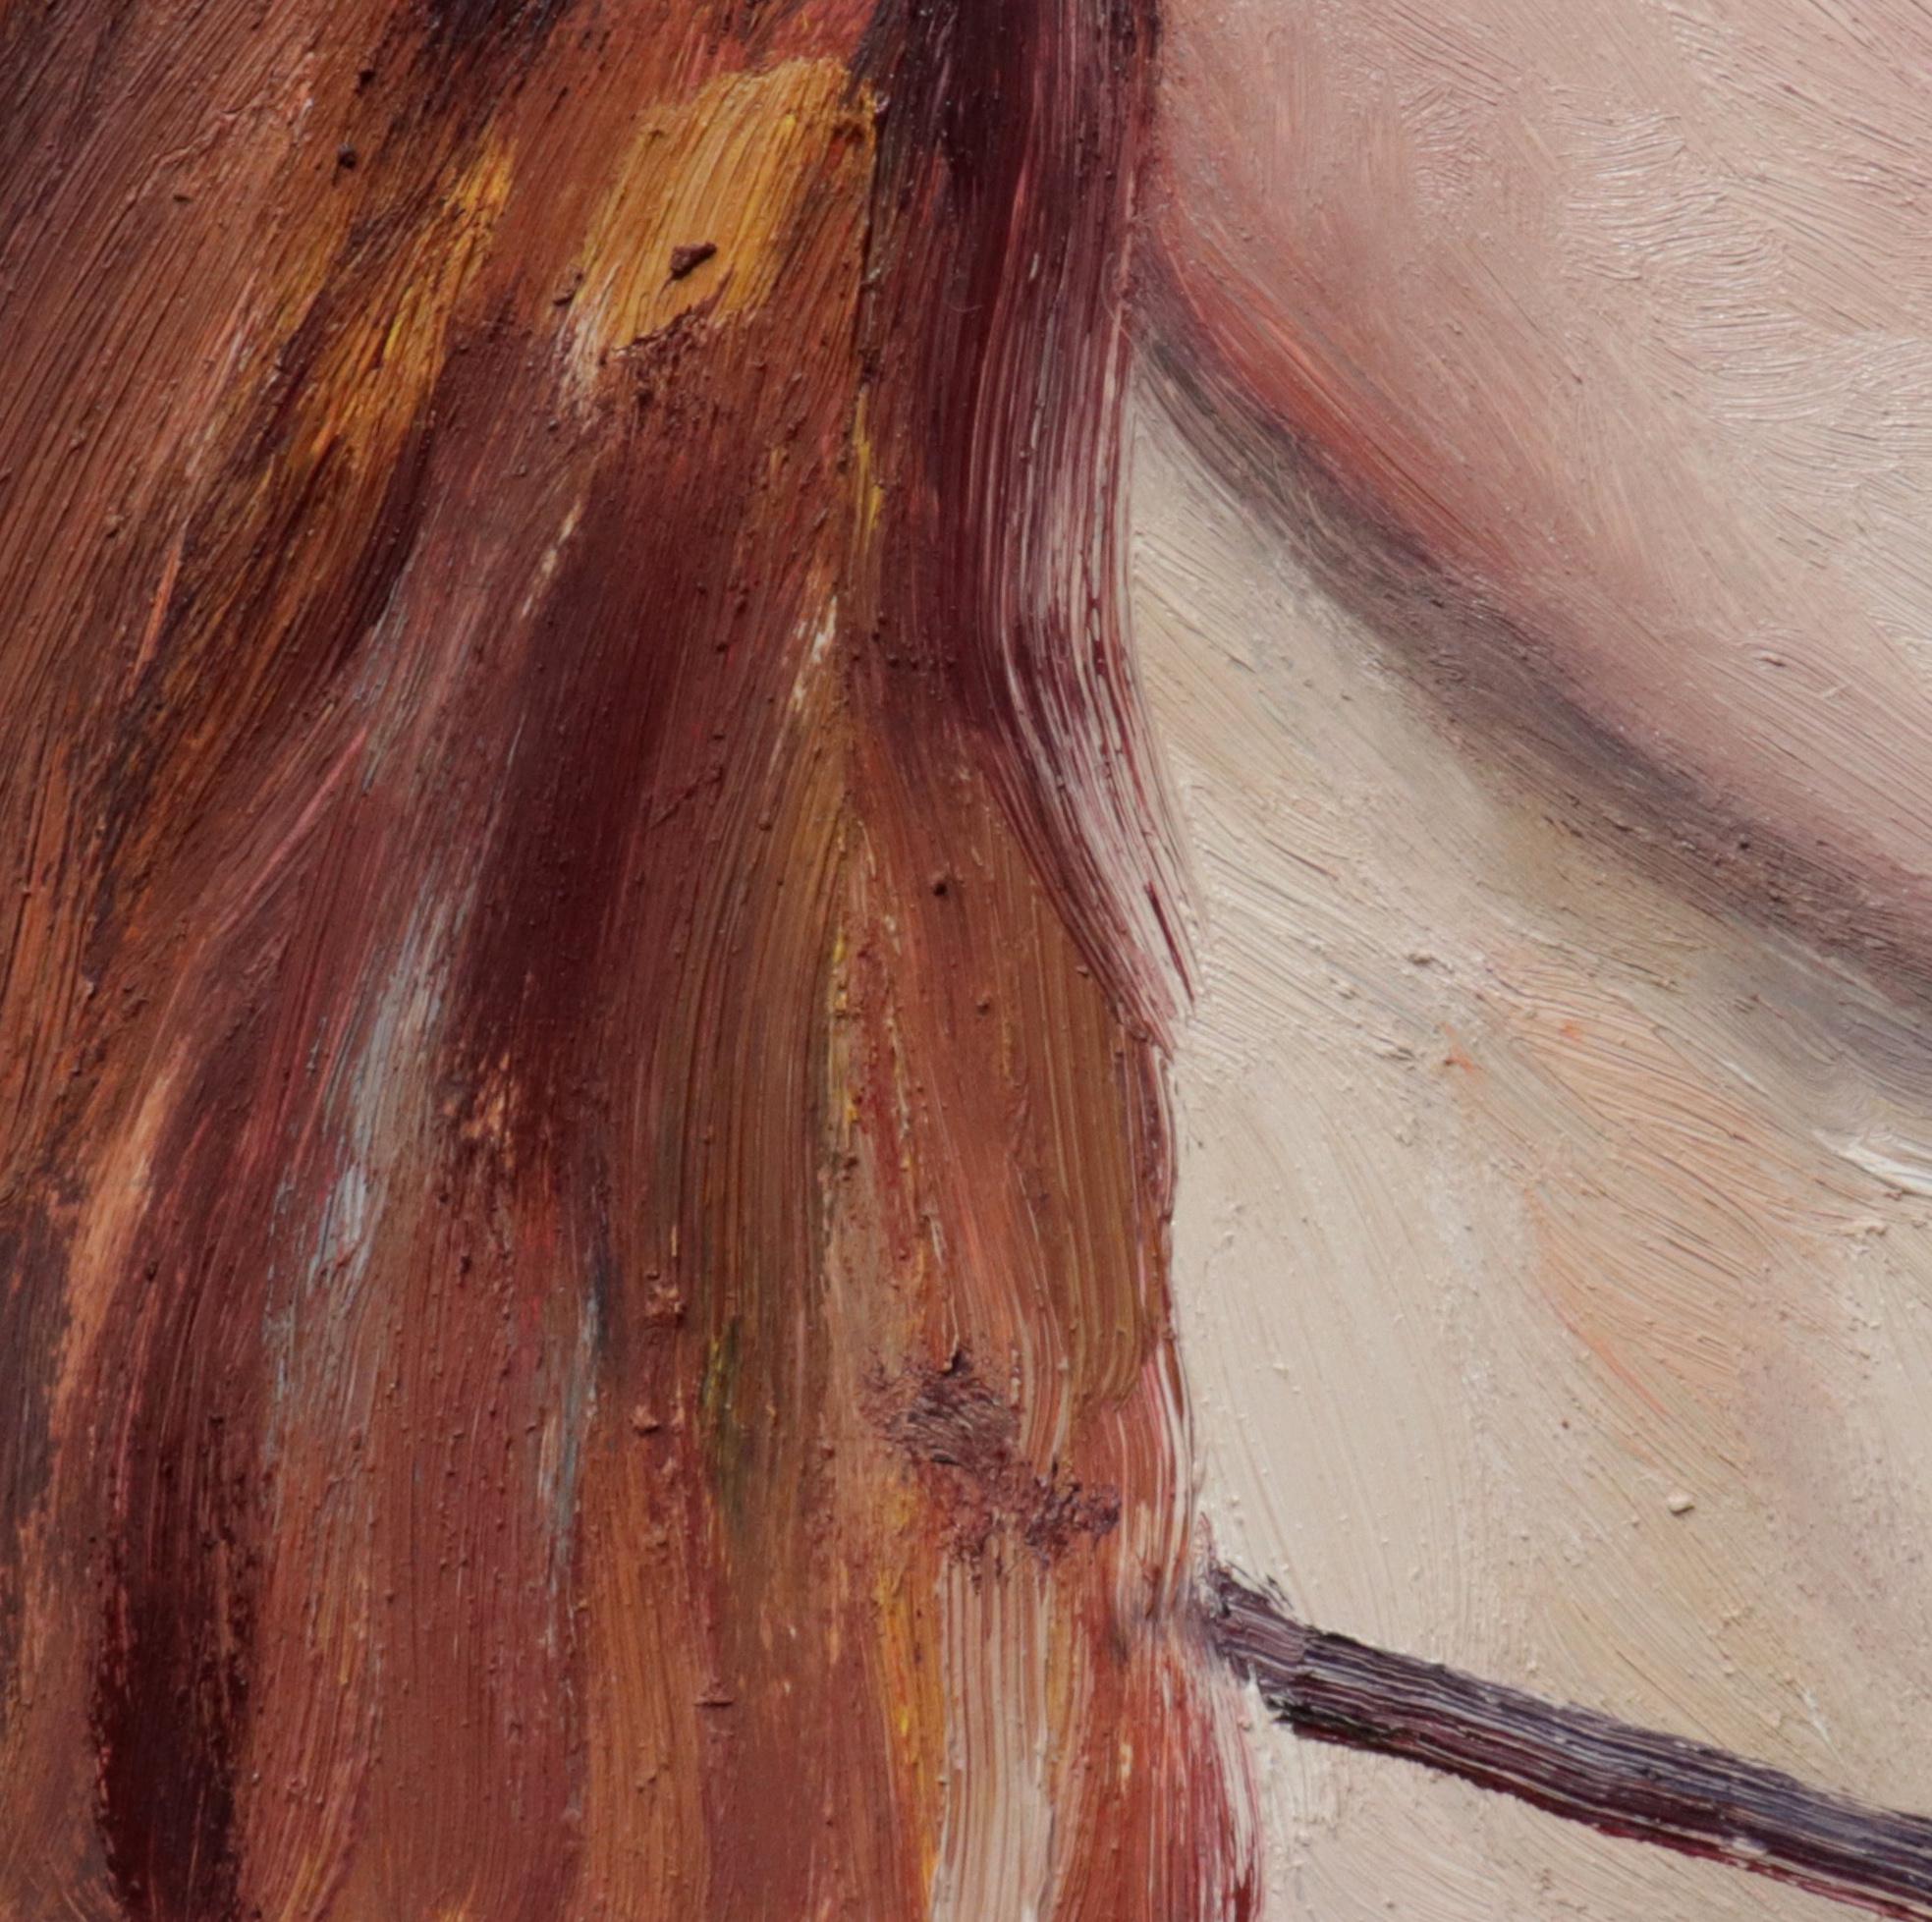 CONSTANCE I - Contemporary Realism / Figurative Art / Red Hair - Brown Portrait Painting by Stephen Wright